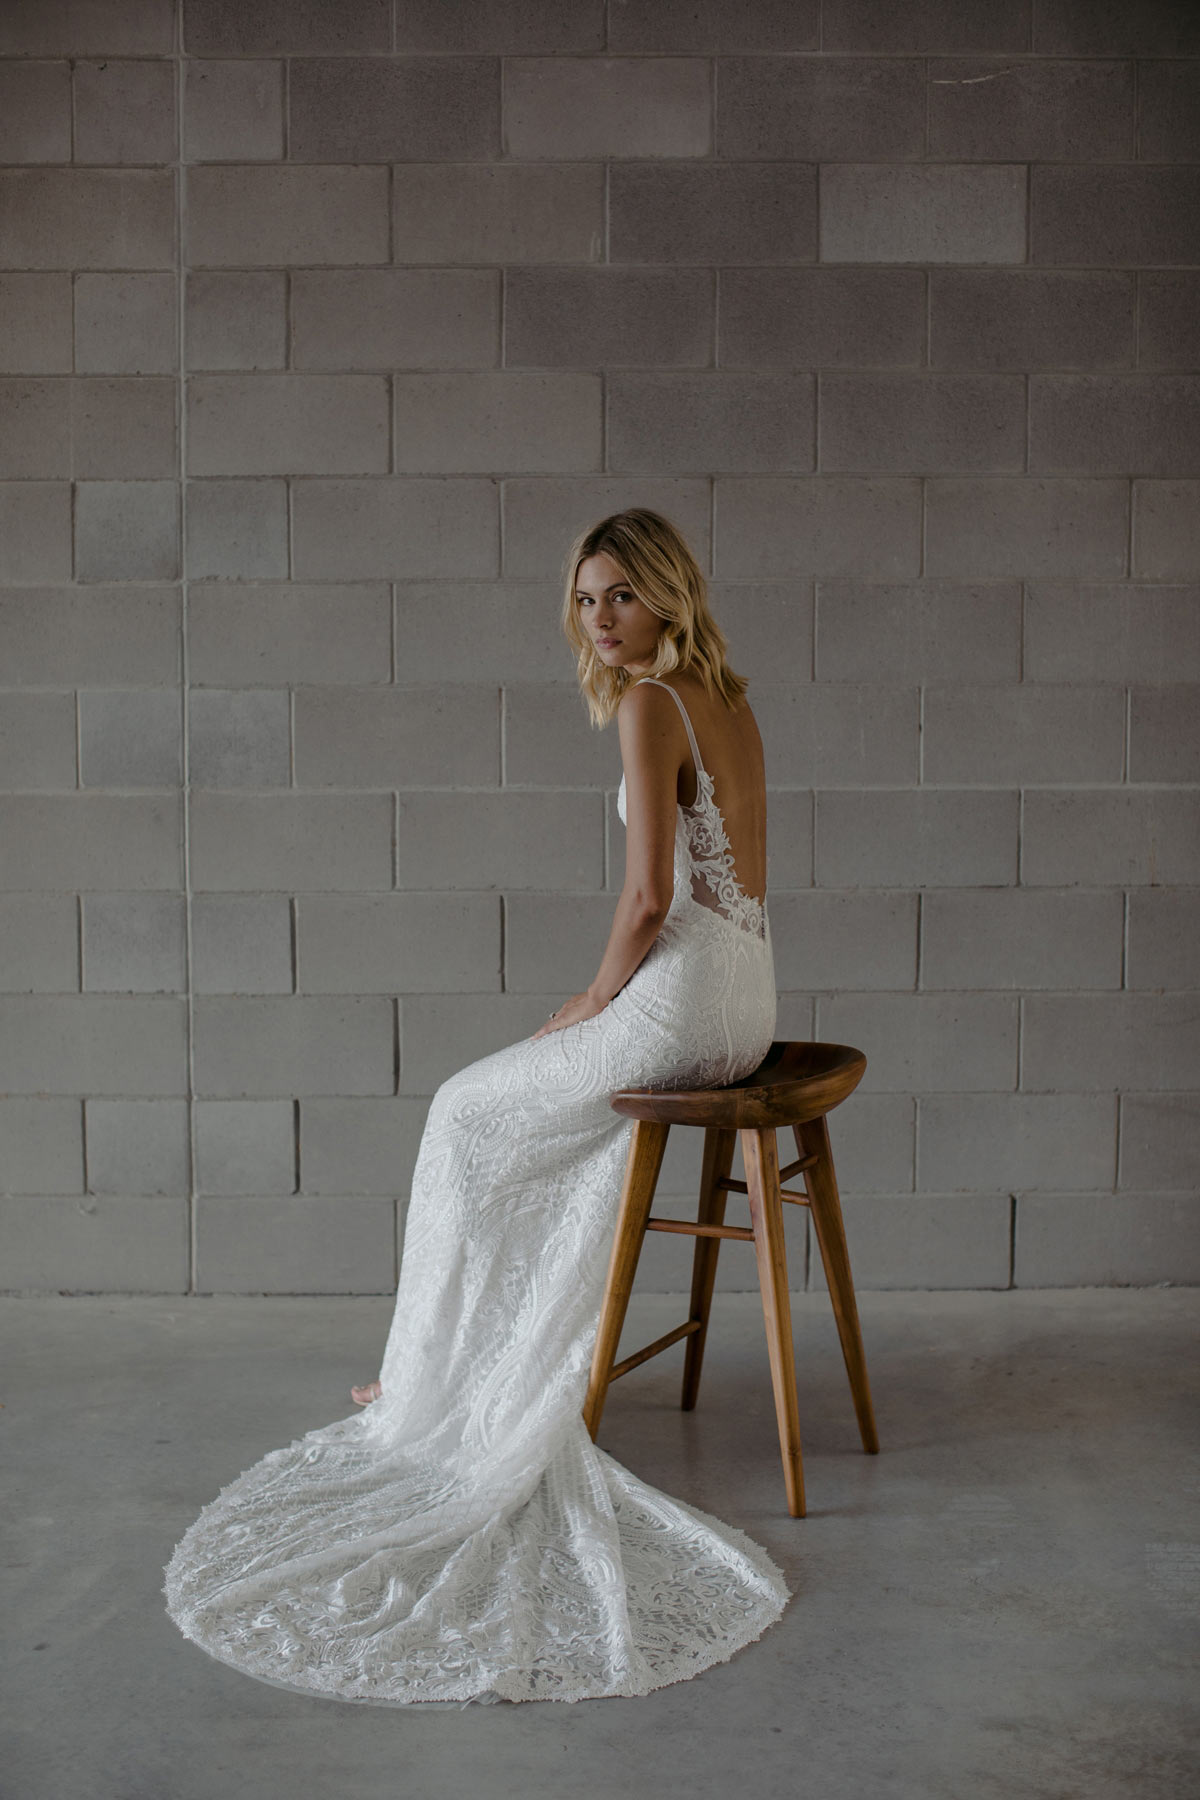 Hot frocks from down under at St Ives Bridal Boutique